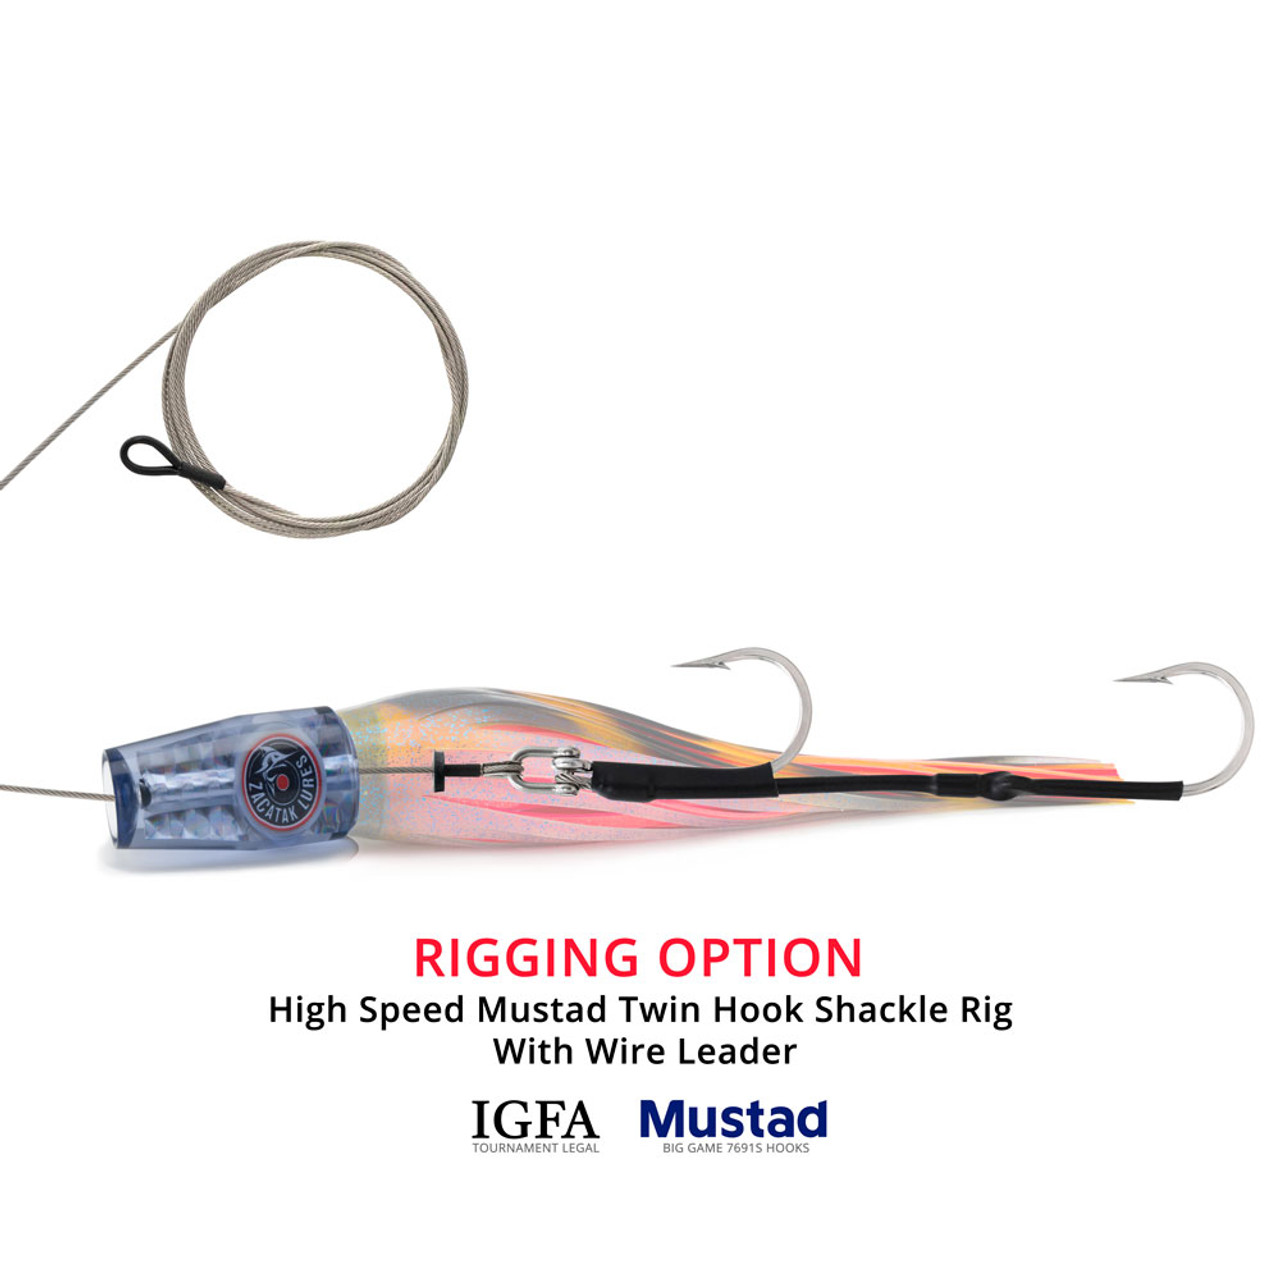 https://cdn11.bigcommerce.com/s-sv4r4mic/images/stencil/1280x1280/products/9827/49347/zacatak-lures-high-speed-rigging-option-twin-hook-shackle-rig-smoka__97526.1671433942.jpg?c=2?imbypass=on